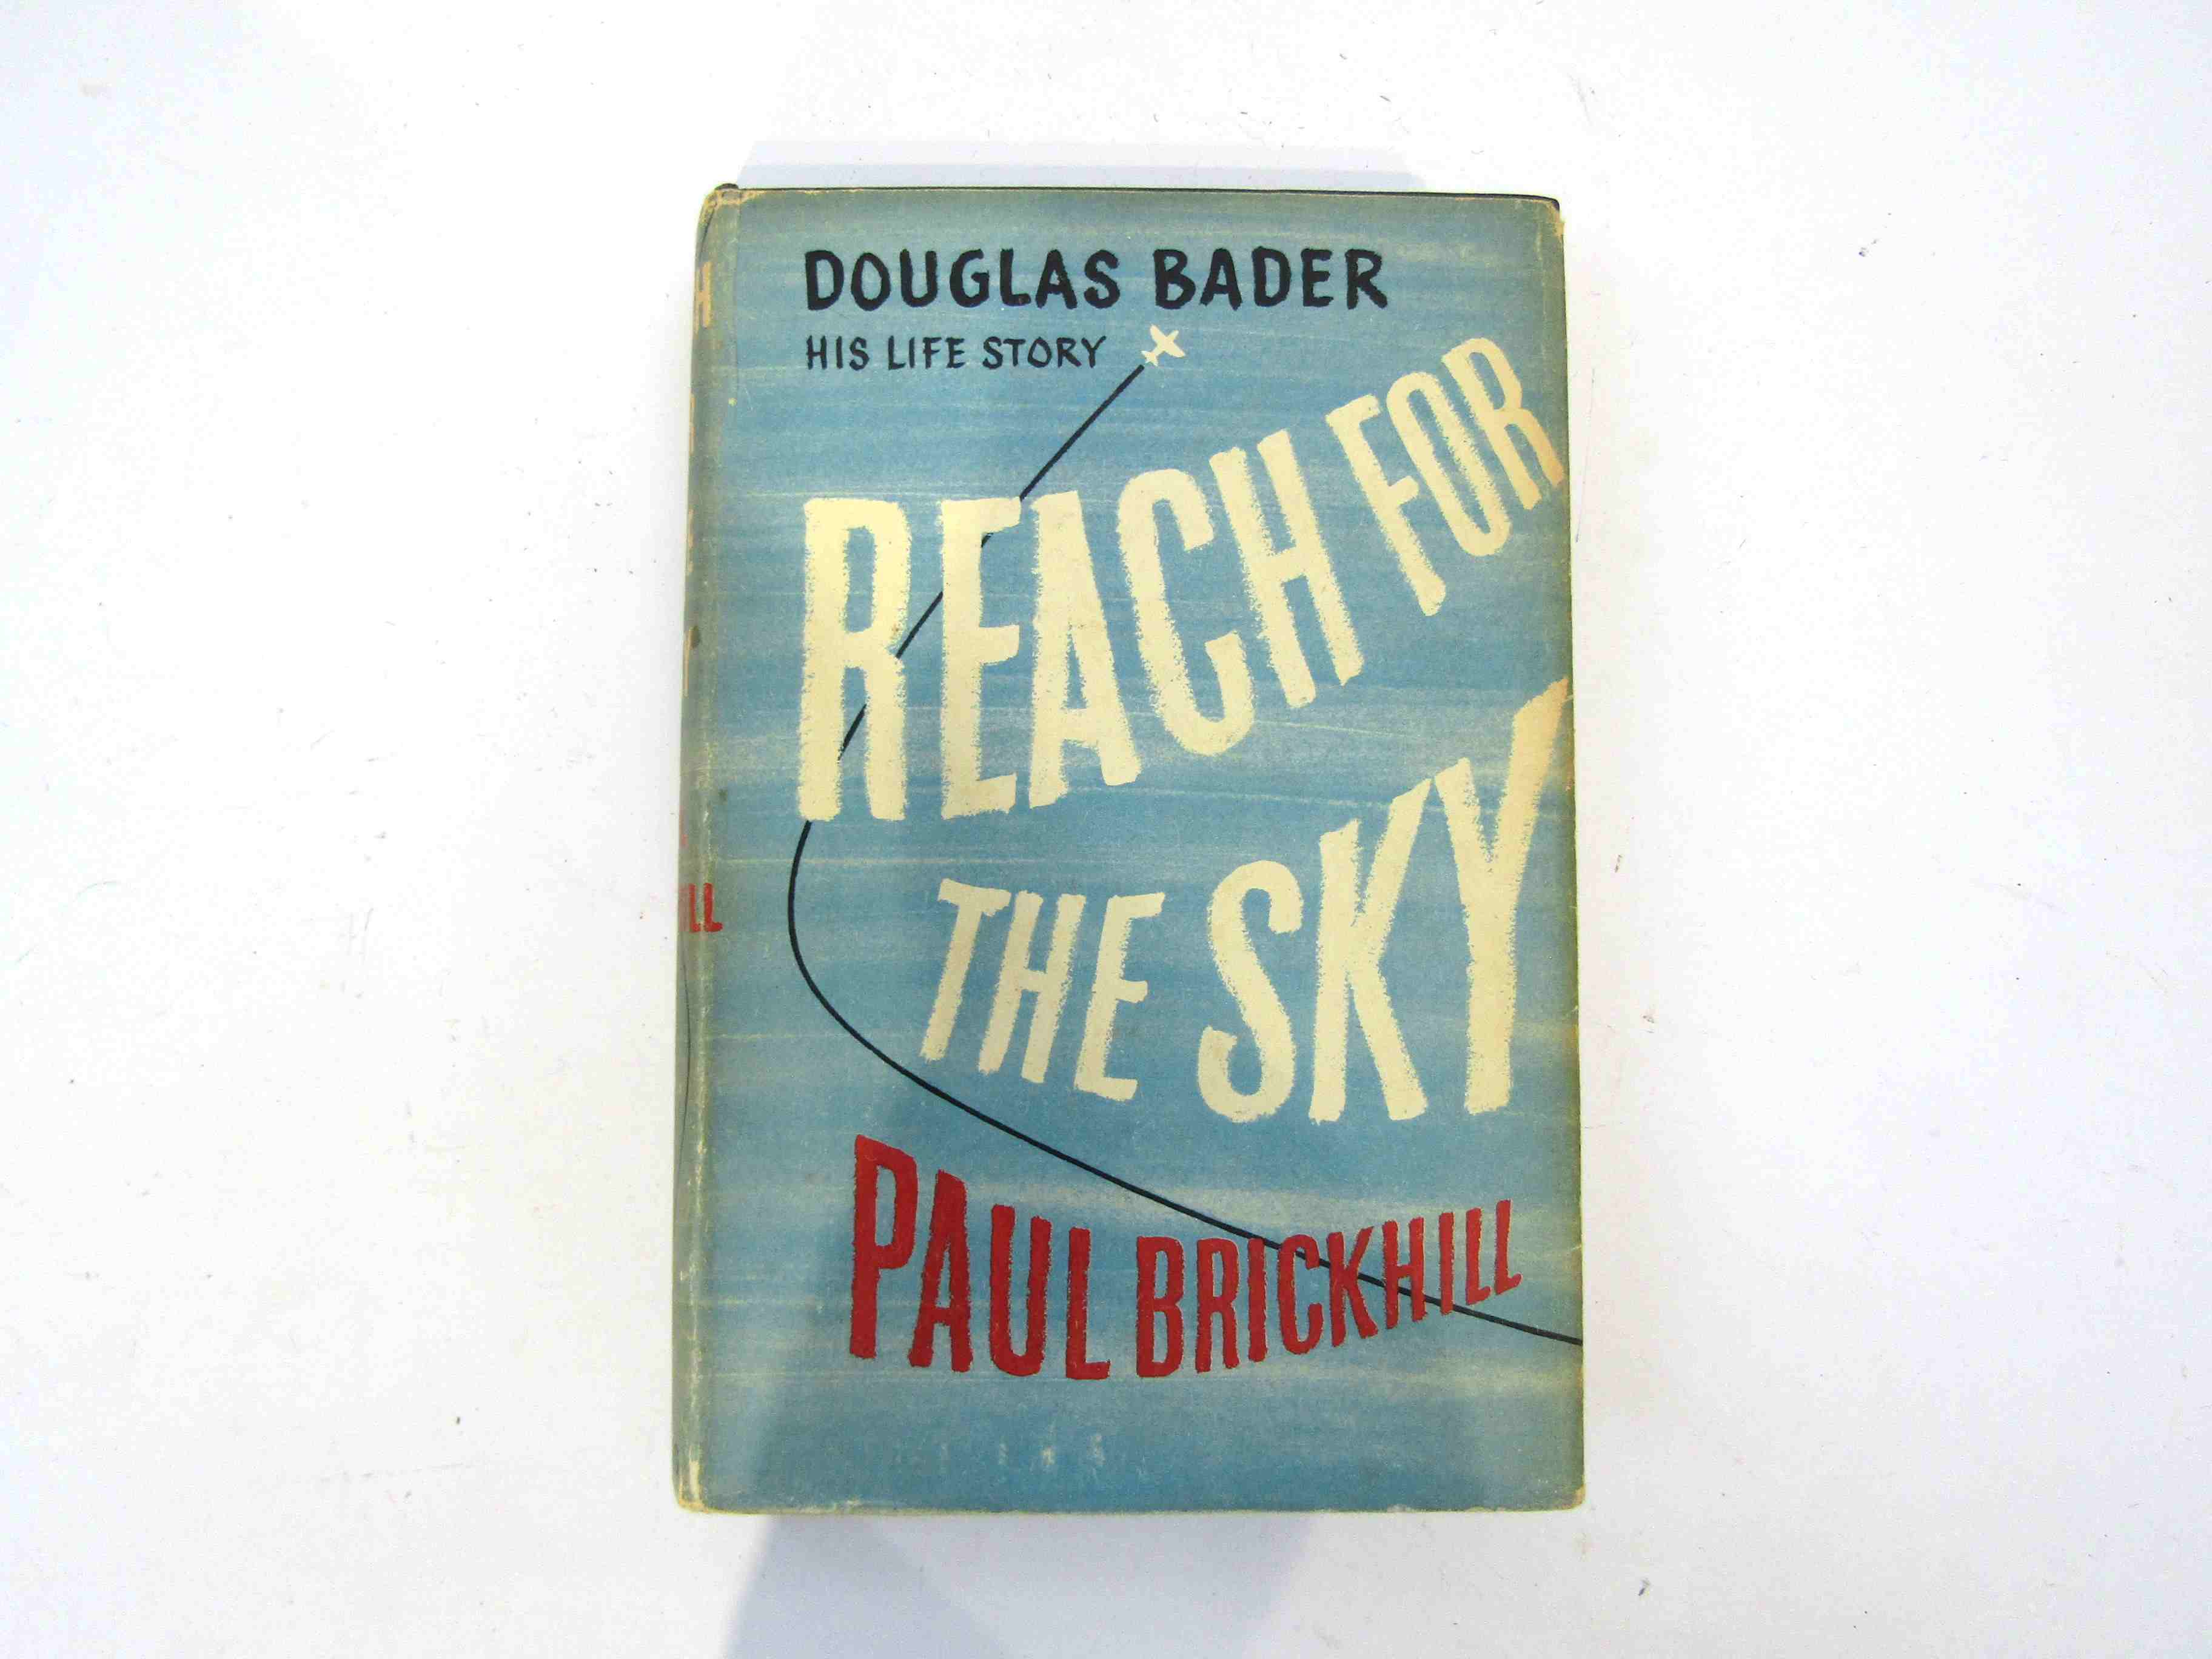 DOUGLAS BADER: "Reach for the Sky" His Life Story by Paul Brickhill,